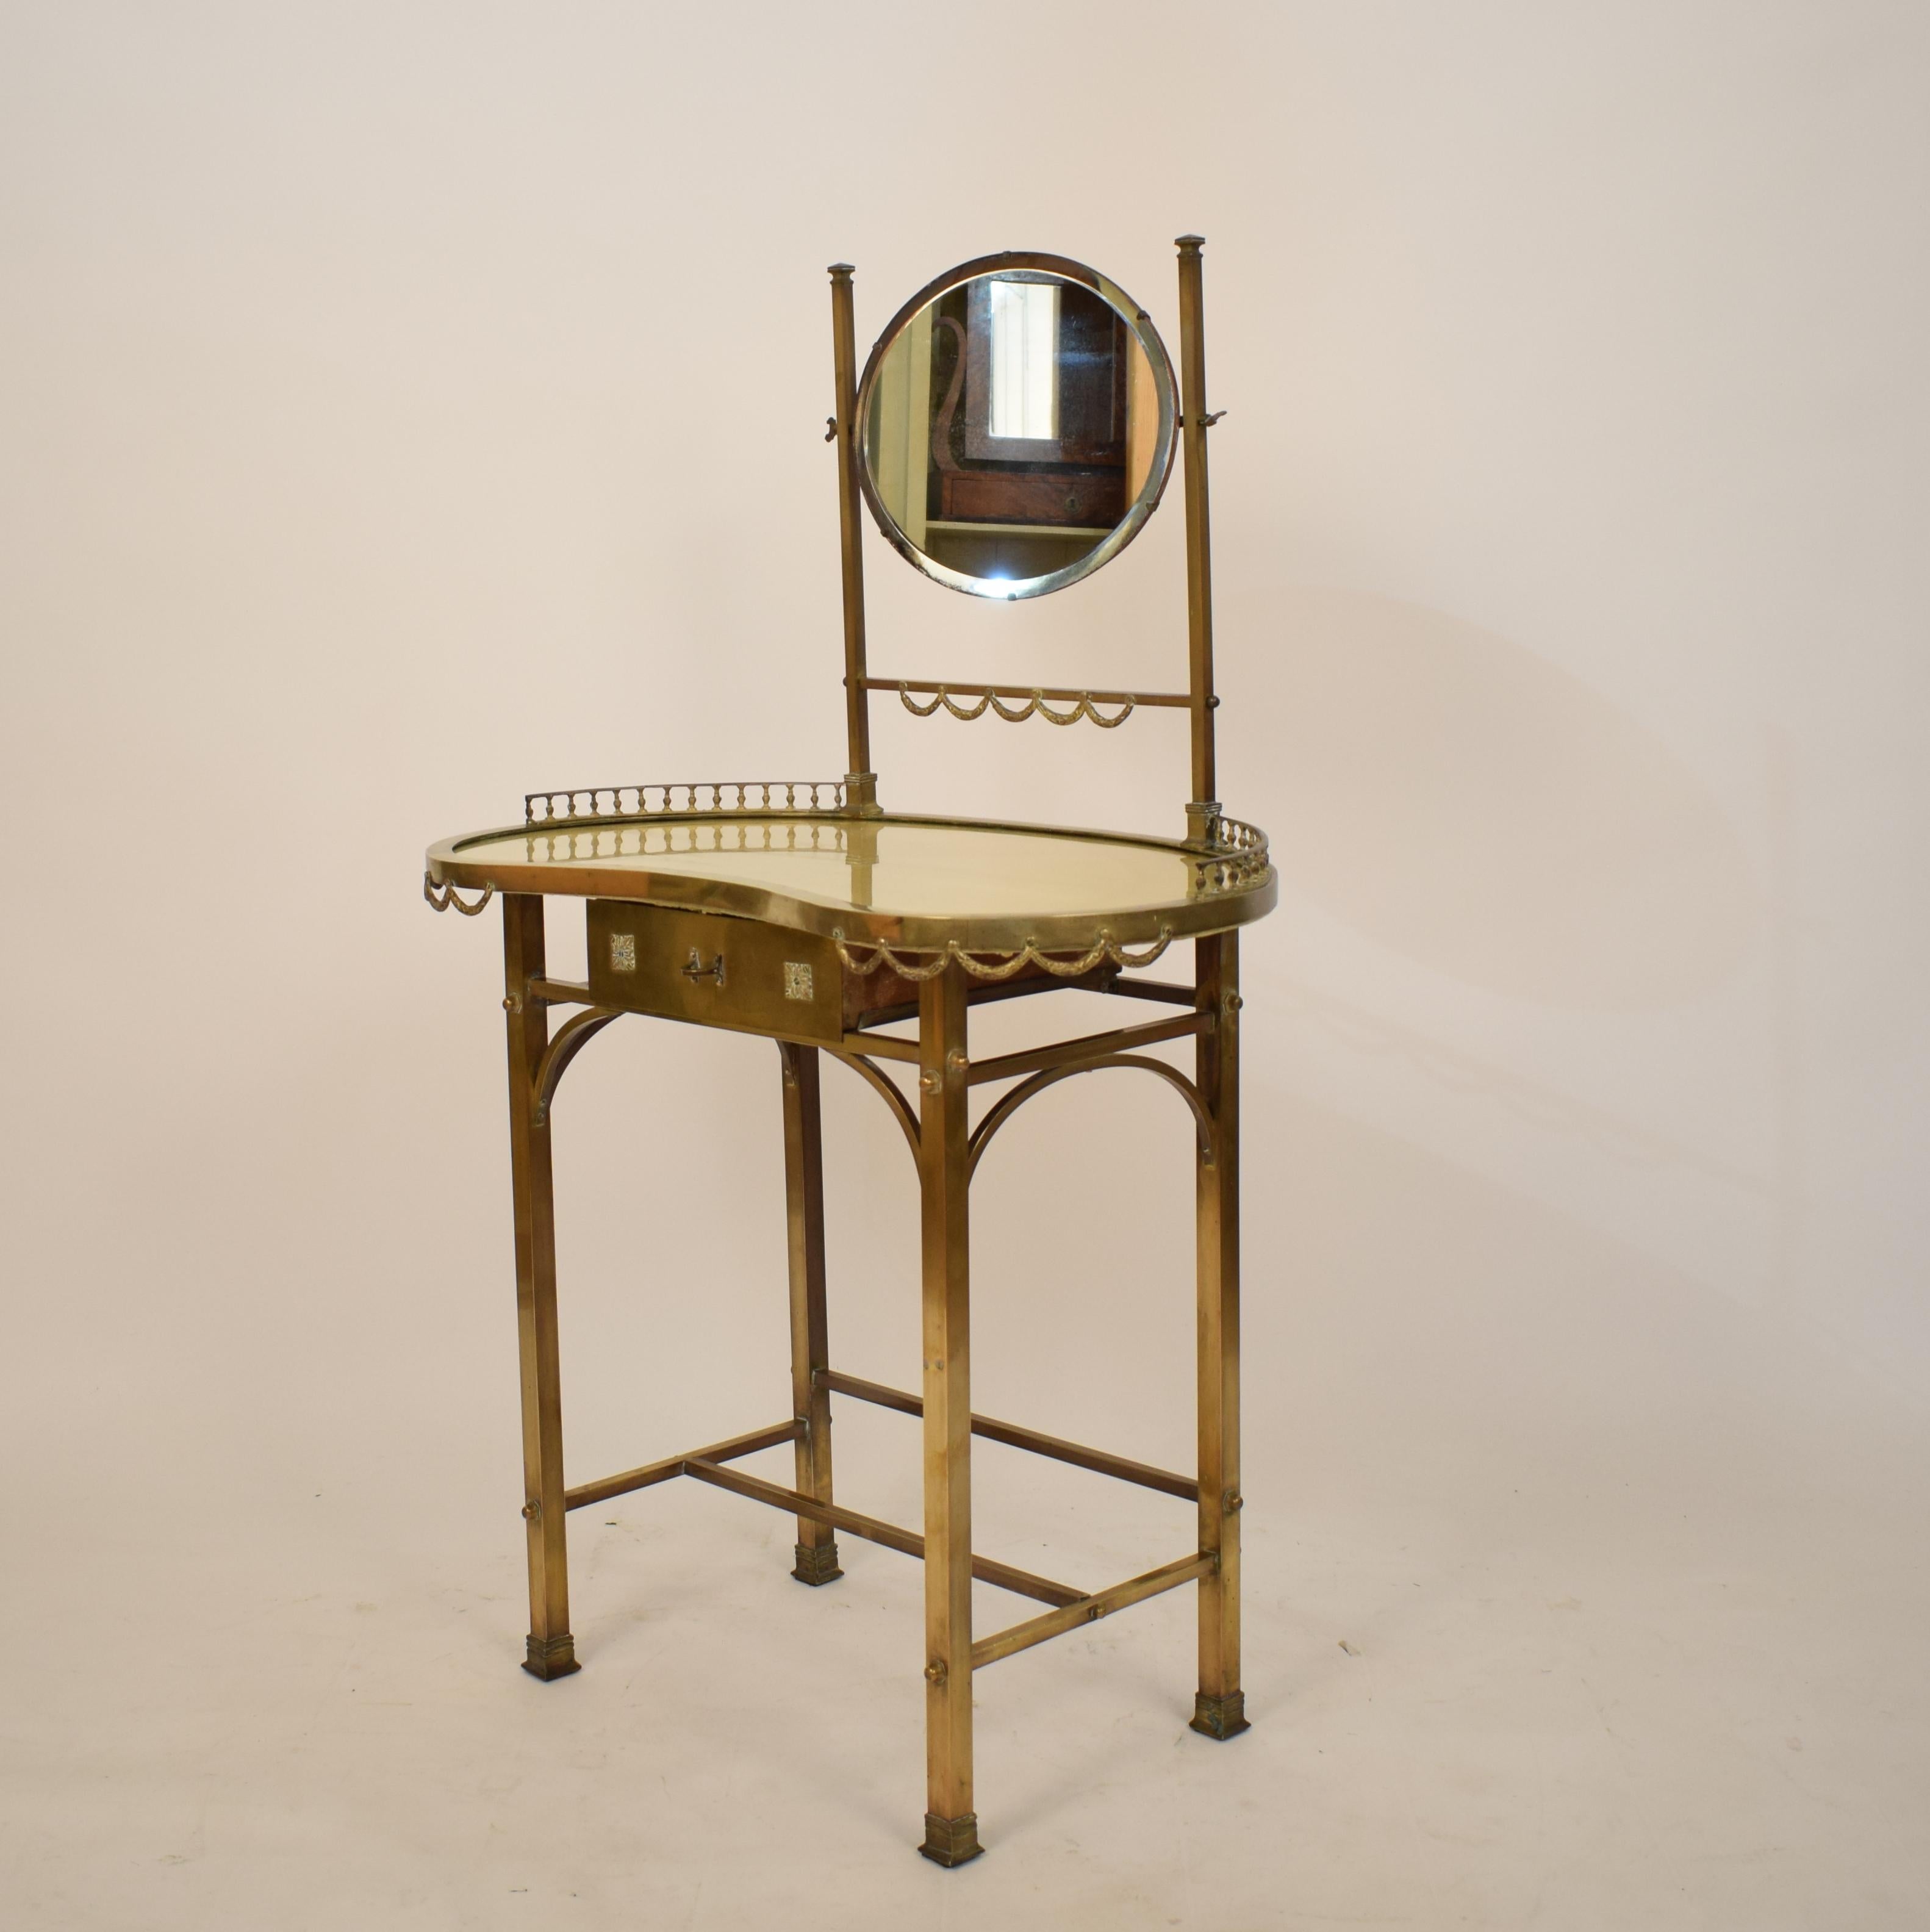 This beautiful and rare midcentury neoclassical style brass / mirrored dressing-table or vanity was made in Italy in the 1950s.
It is in original untouched beautiful condition. Even the golden silk underneath the glas top is there.
The brass